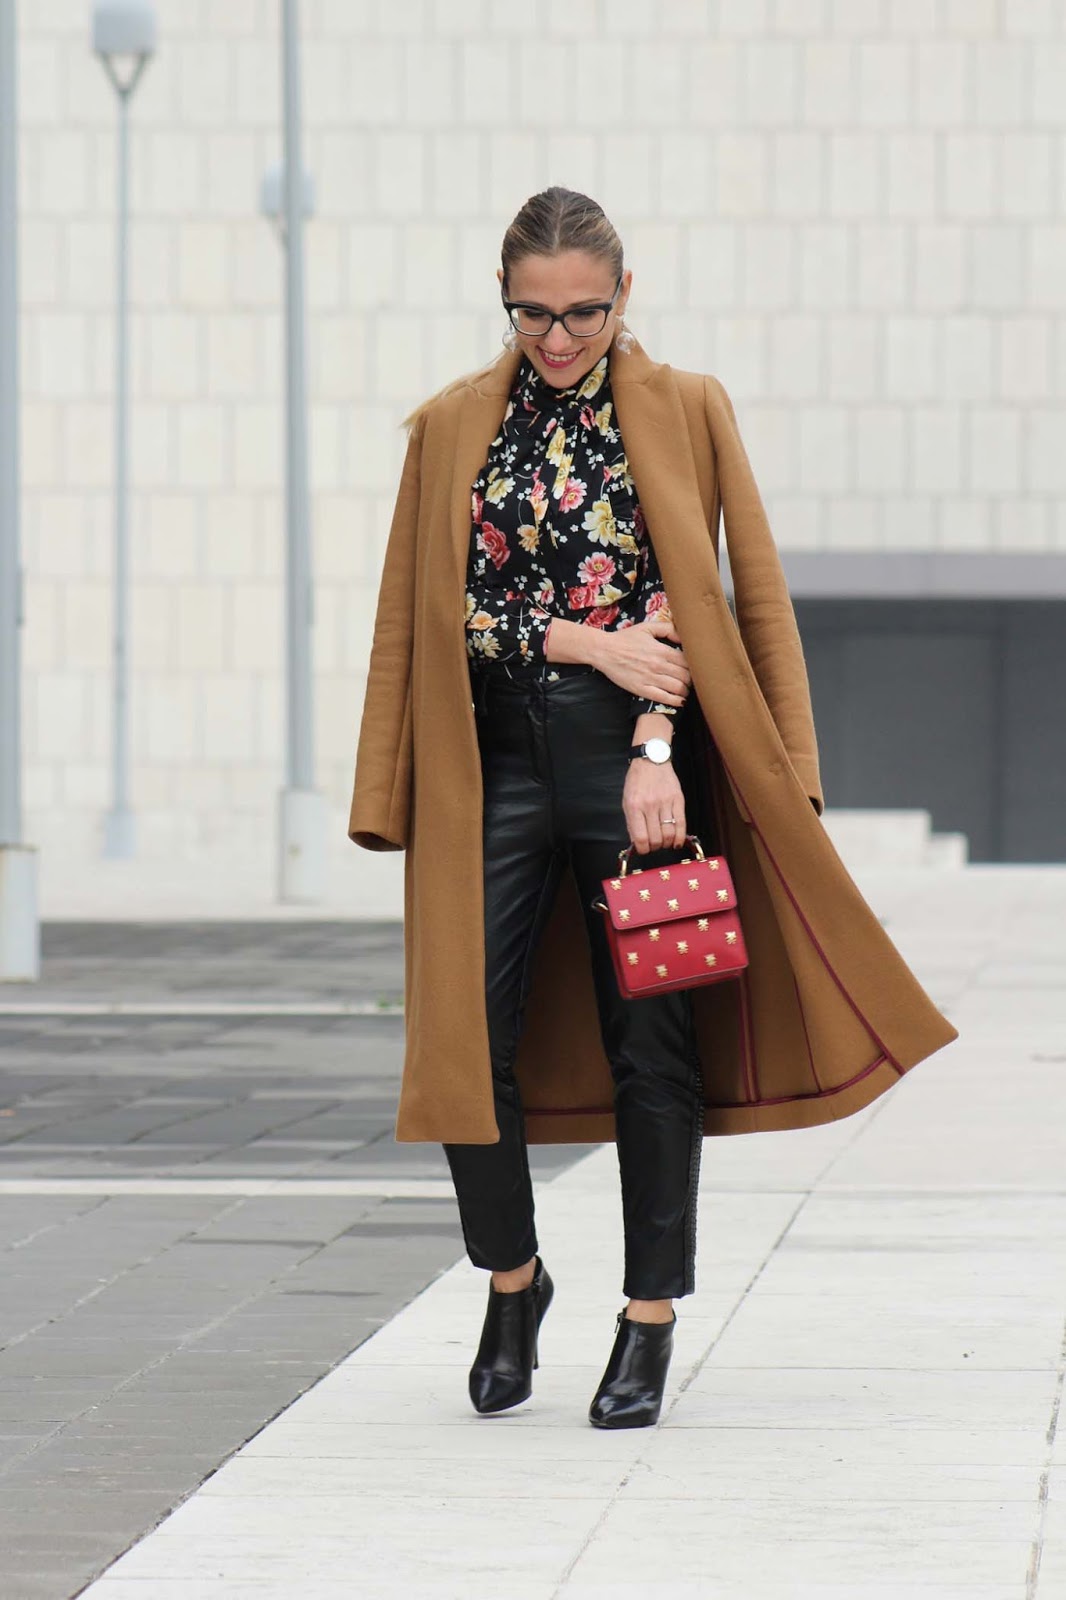 Eniwhere Fashion - Camel coat and floral shirt - Coto Privado